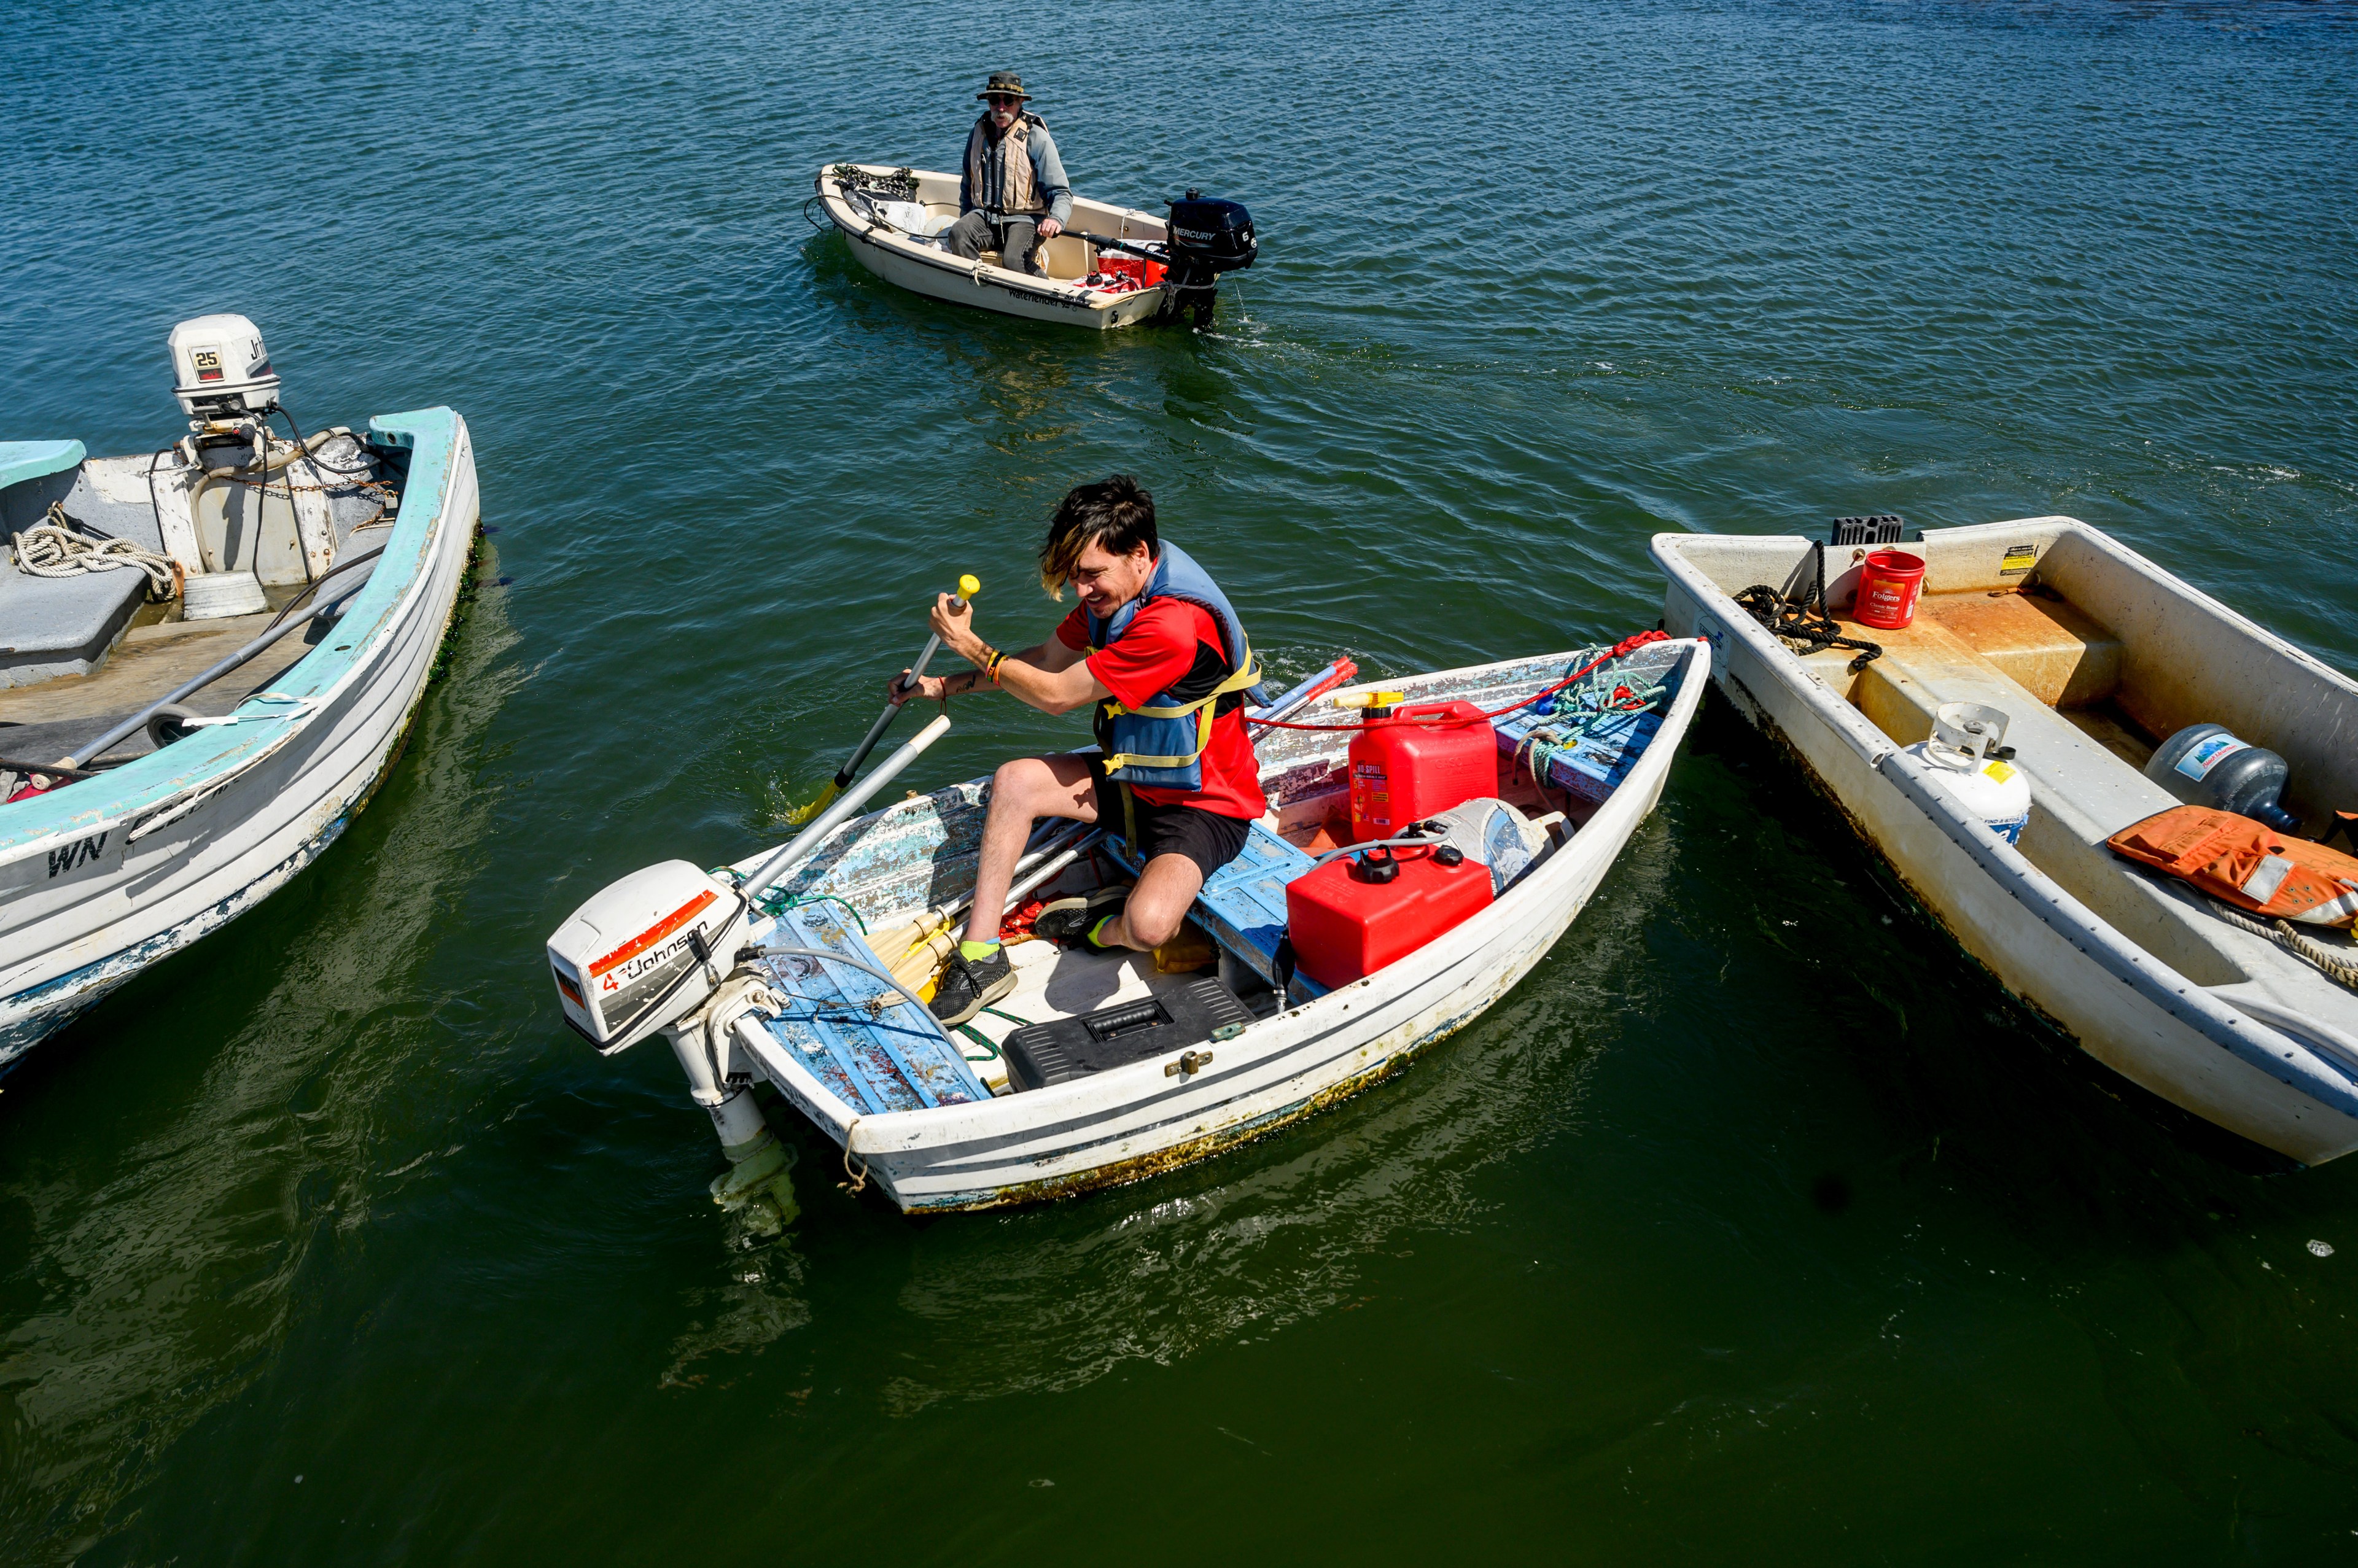 A person in a red life jacket rows a cluttered small boat among others on a sunny, calm water body.